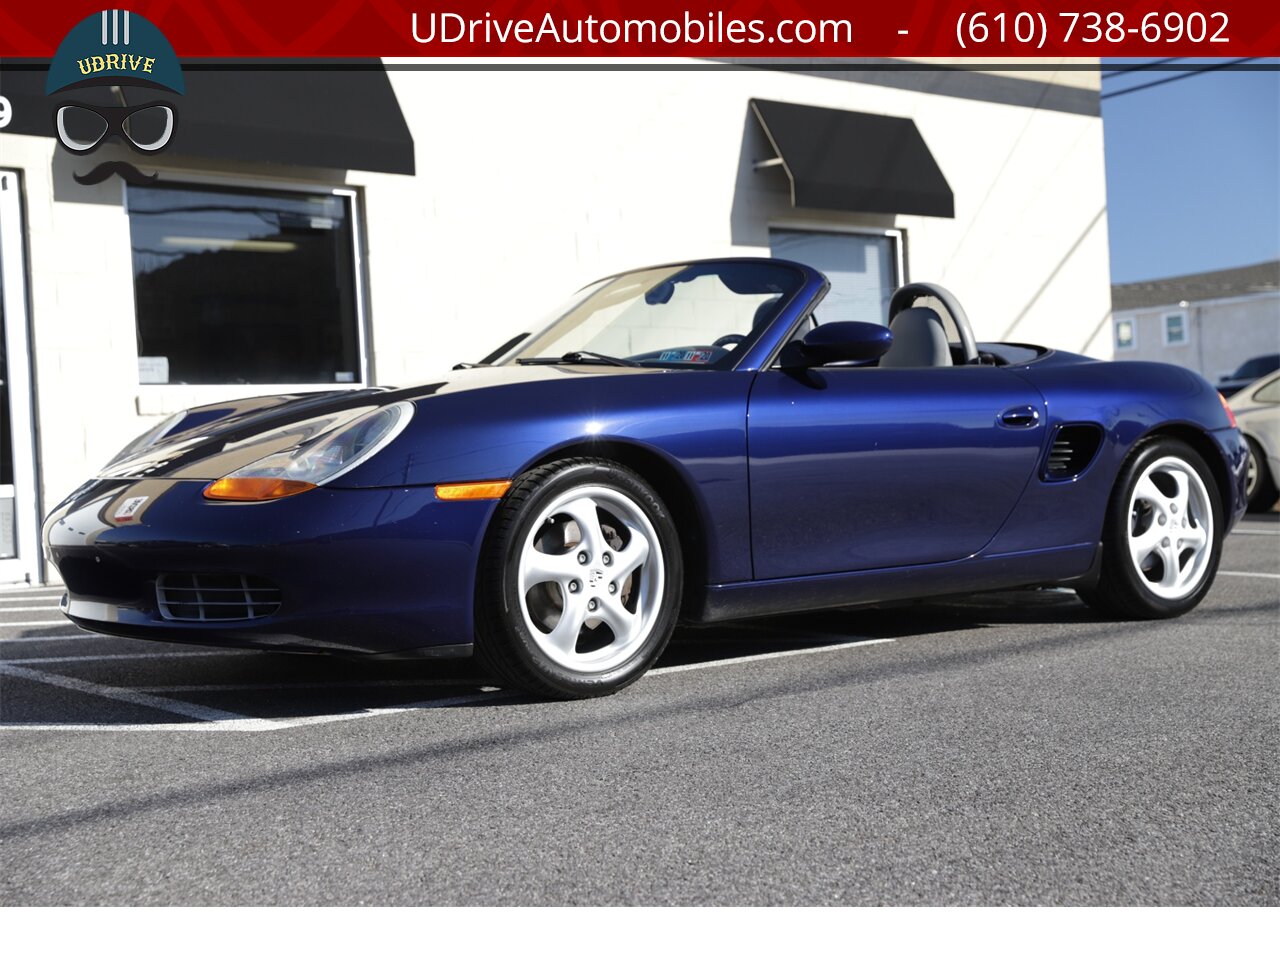 2001 Porsche Boxster 5 Speed Manual Detailed Service History  Same Owner for Last 18 Years Hard Top Included - Photo 9 - West Chester, PA 19382